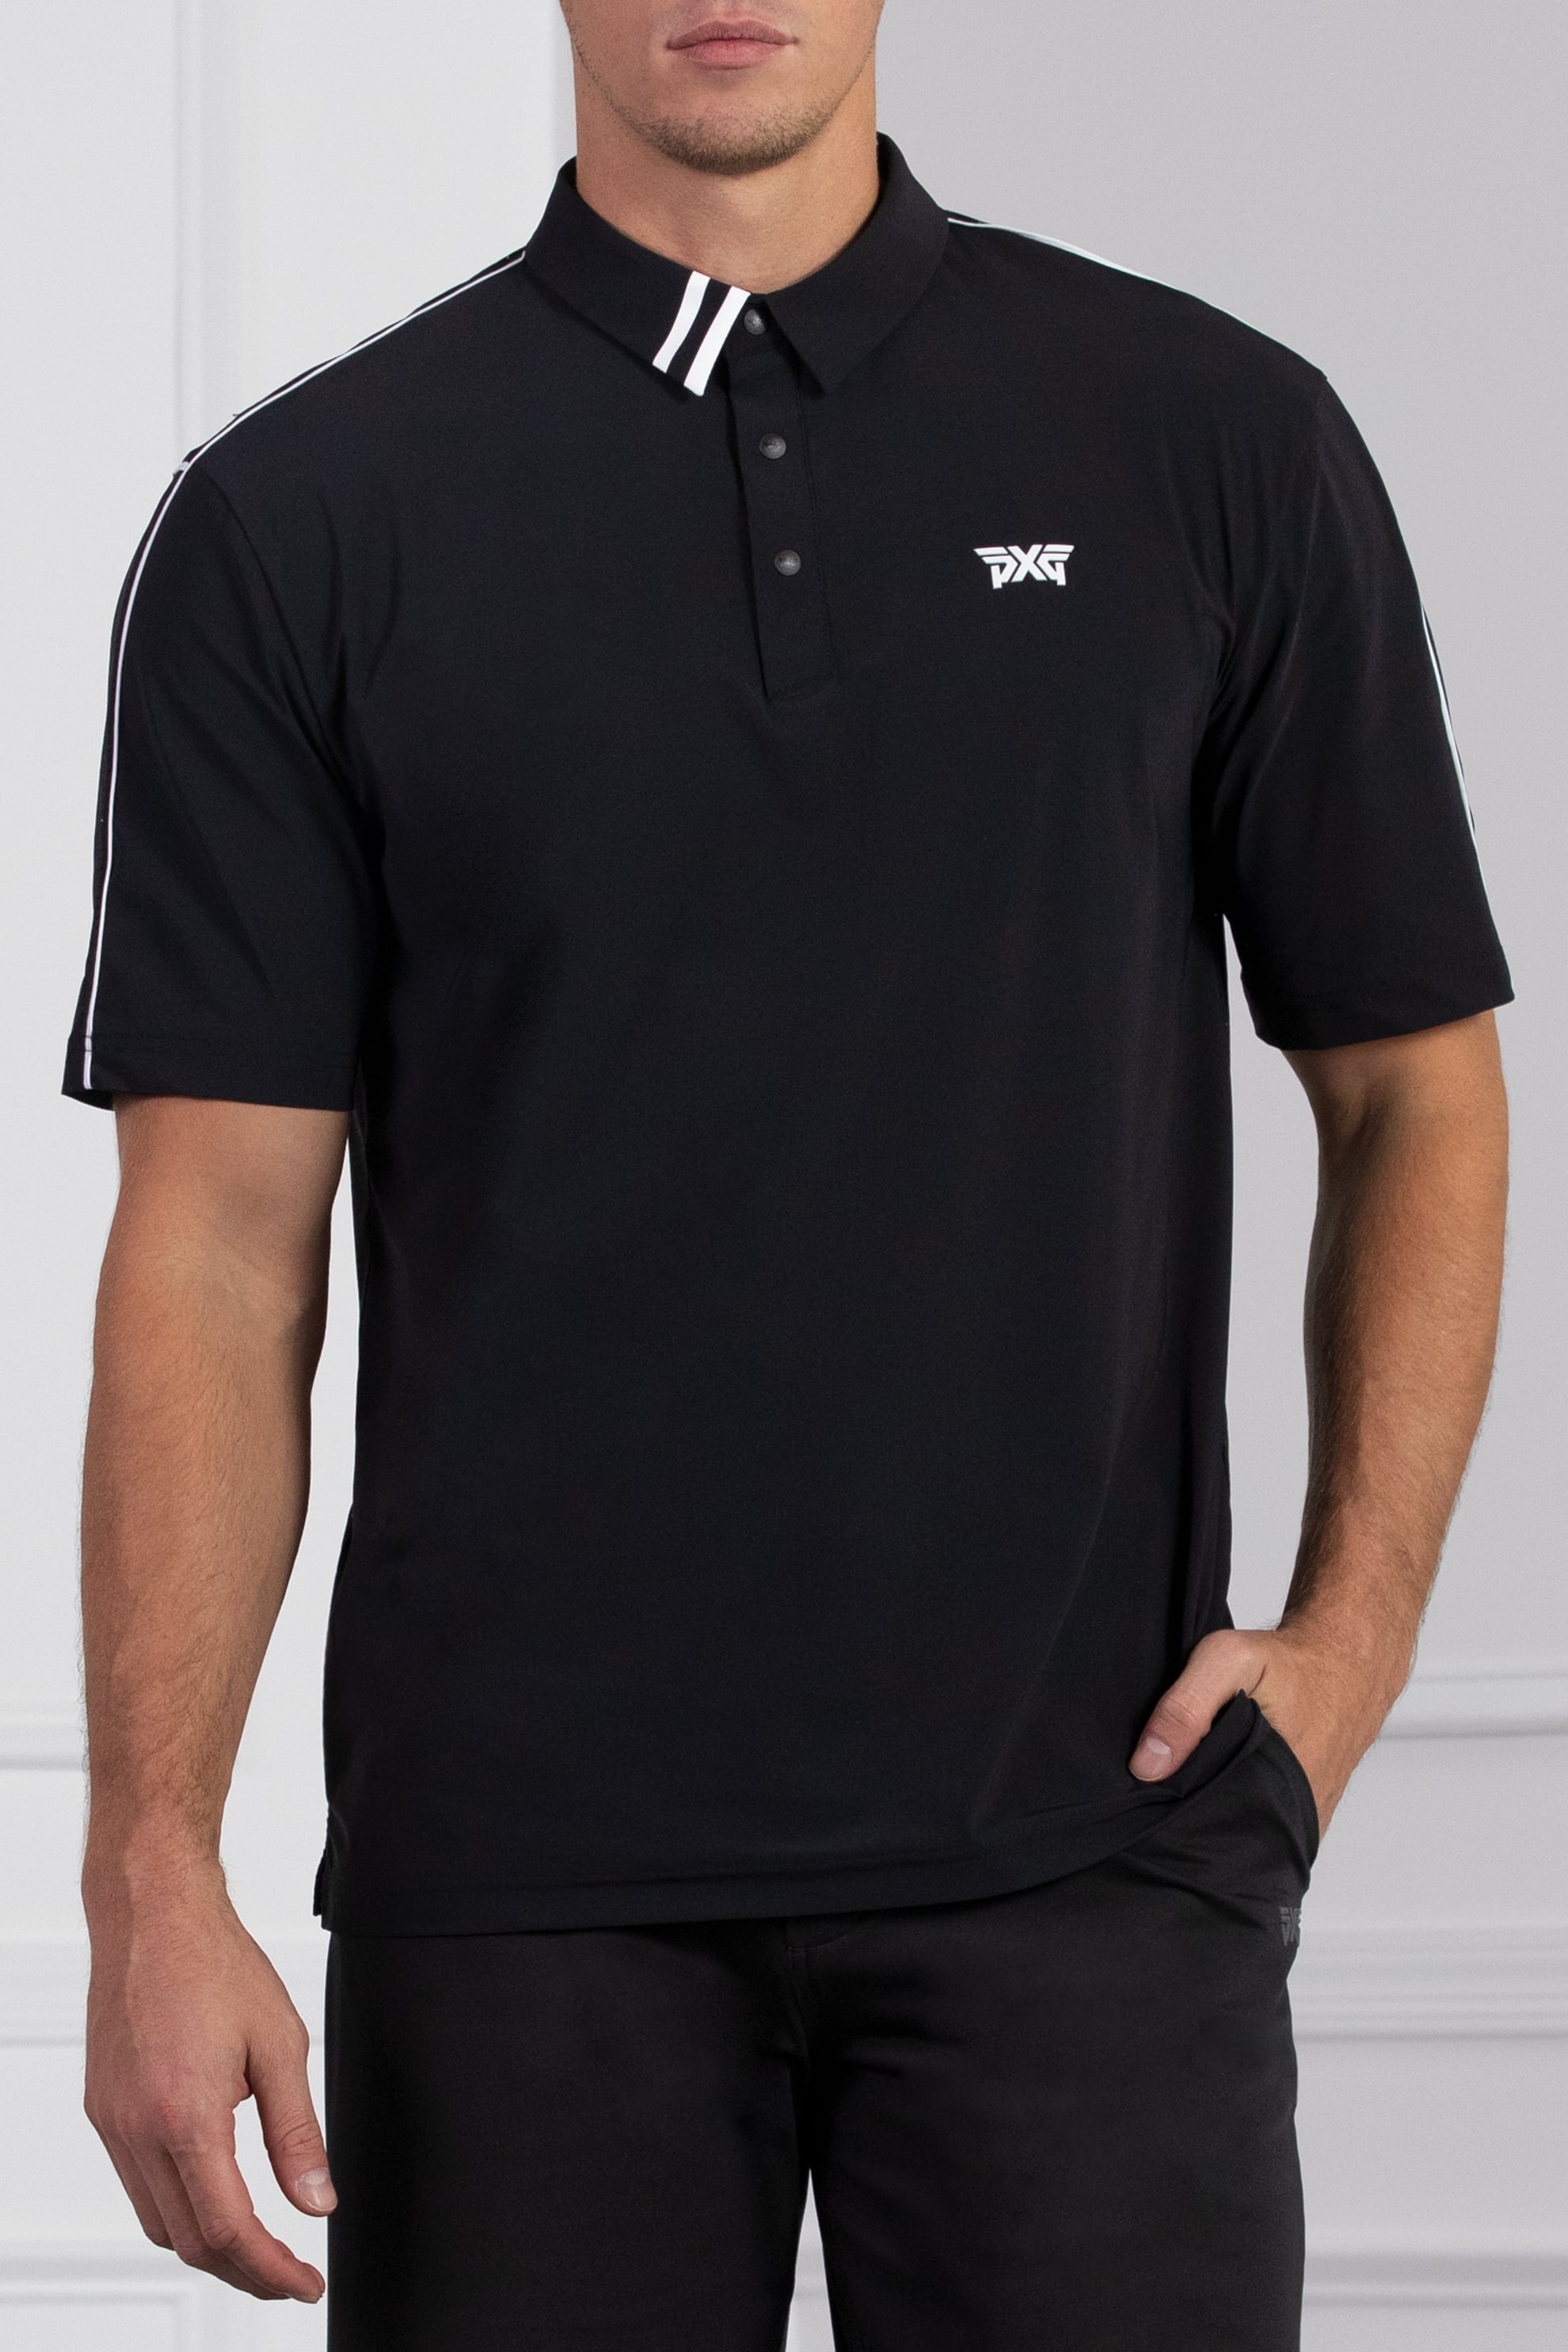 Gear, at Shop Highest PXG Polo the Clubs Quality Accessories and Fineline Fit Golf | Golf Apparel, Comfort